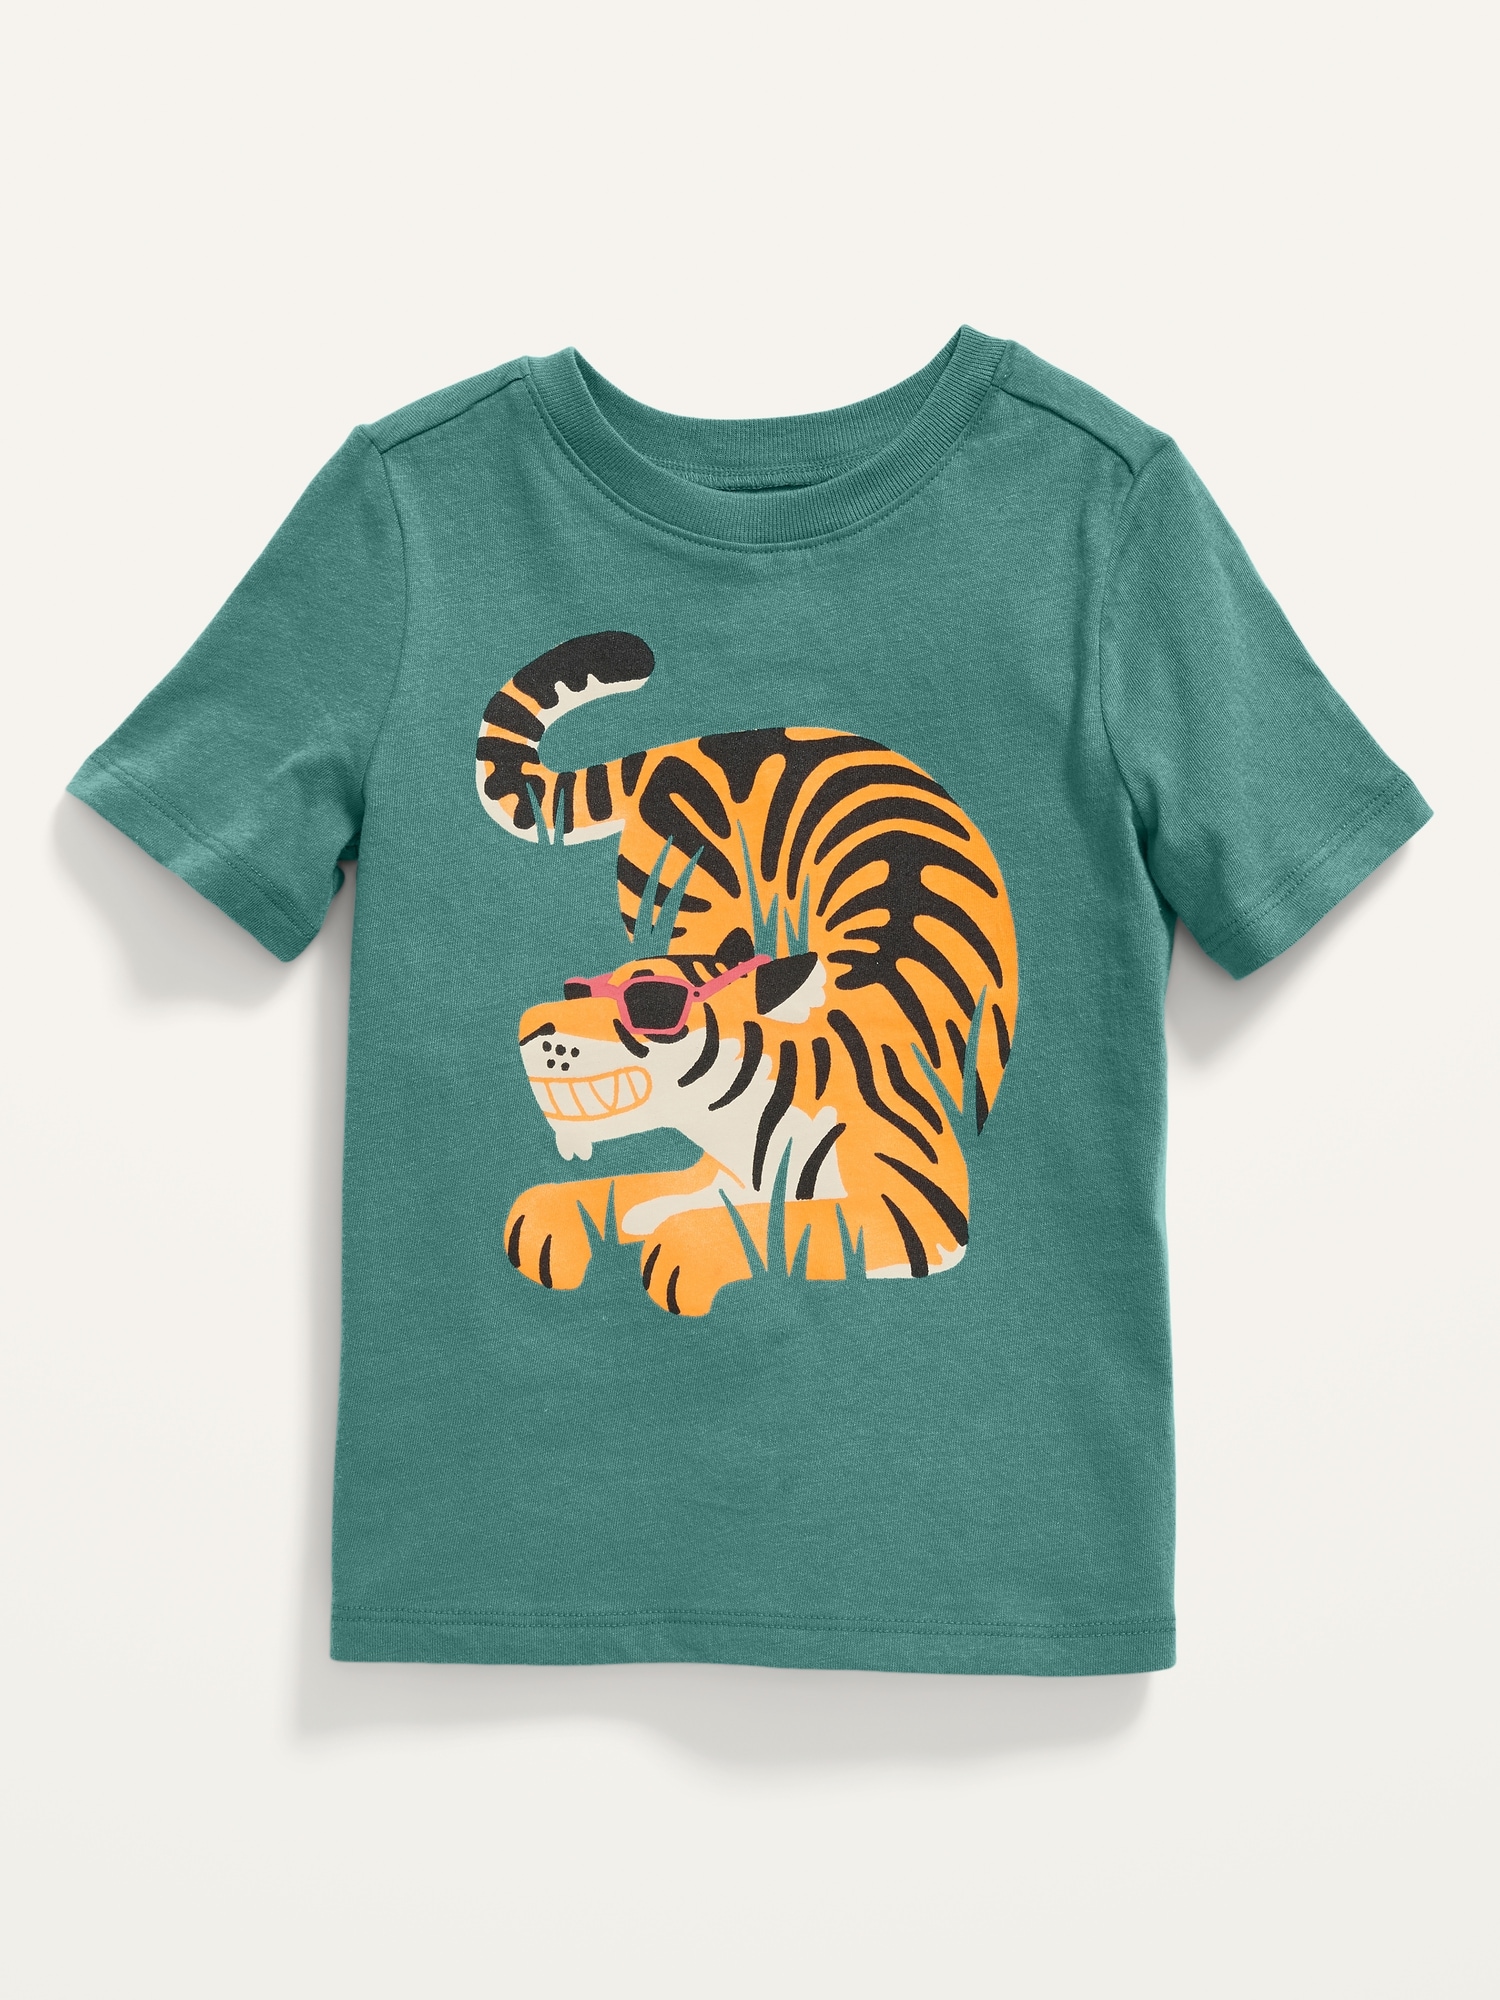 Unisex Short-Sleeve Graphic Tee for Toddler | Old Navy